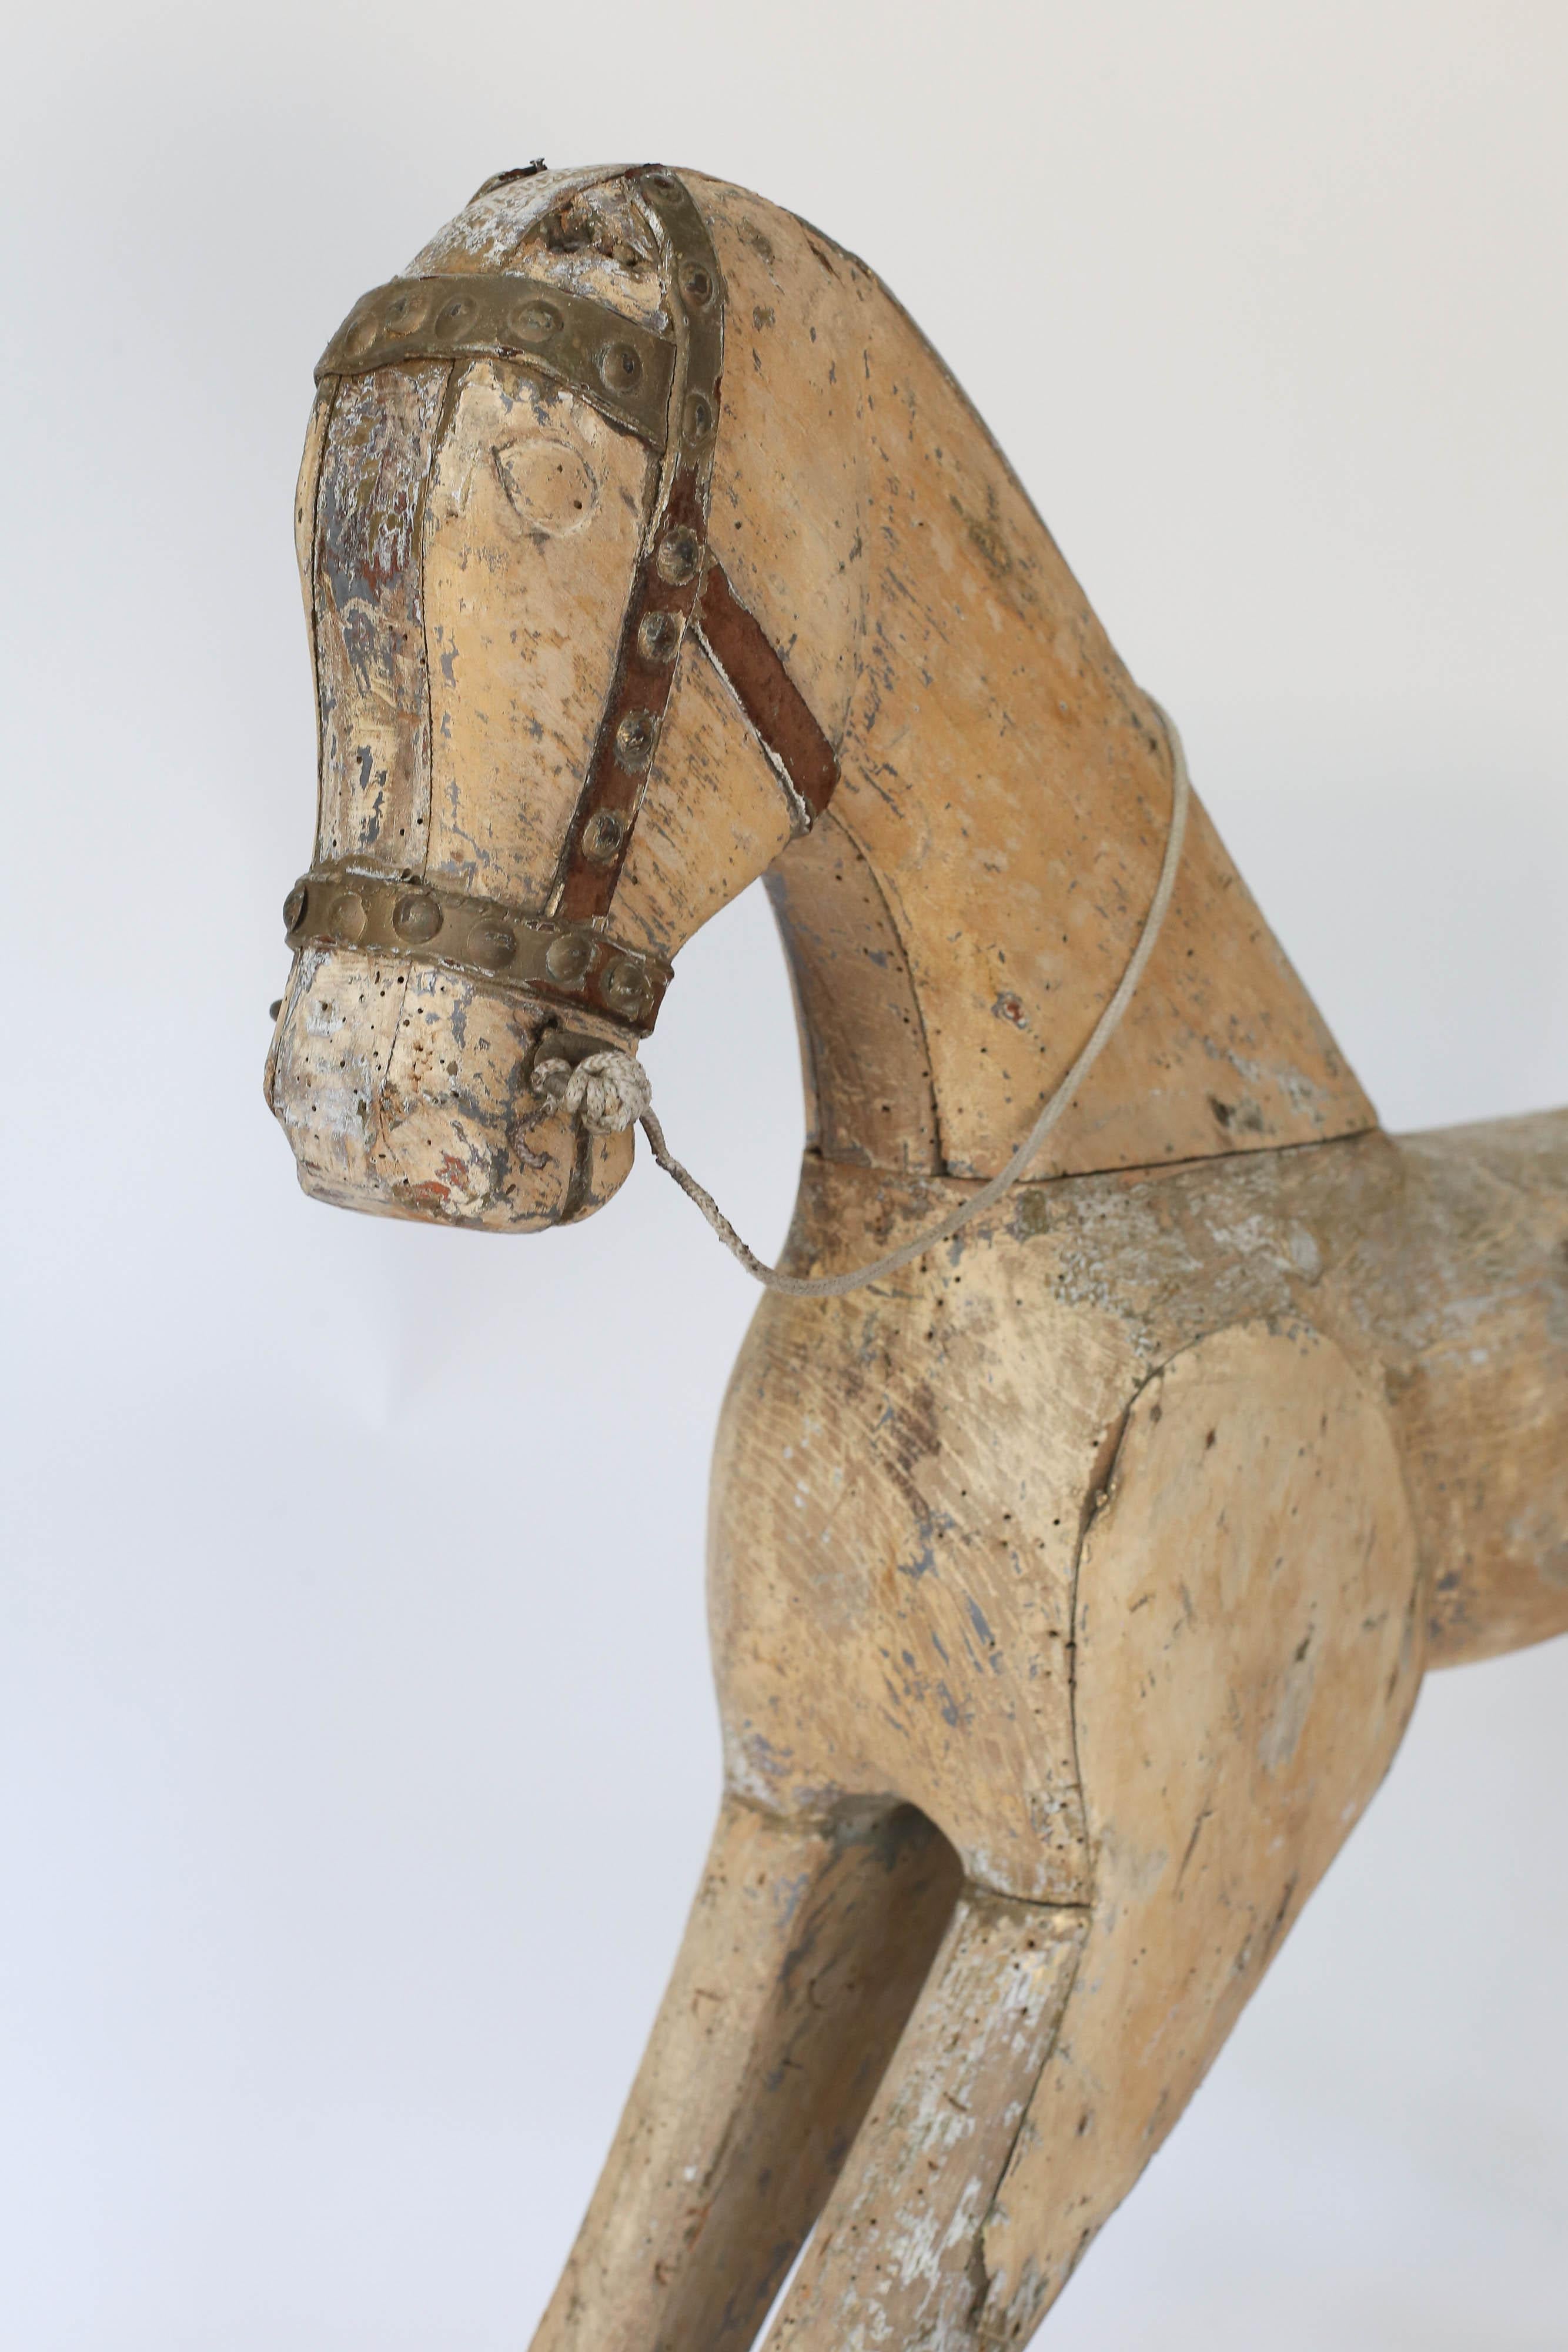 A 19th century carved and painted wooden toy horse from Sweden. A truly loved piece with a metal bridle, ears and tail have been lost through the years of love.